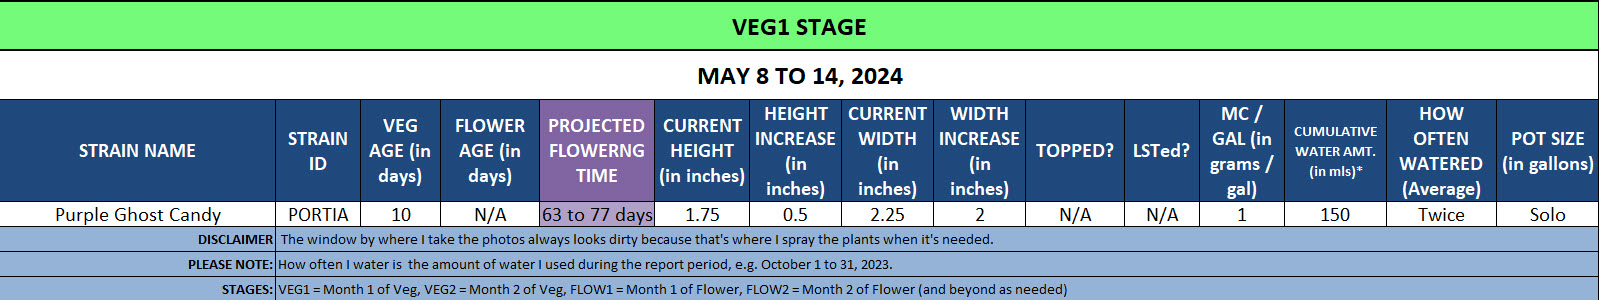 420 Update for May 8 to 14, 2024.jpg